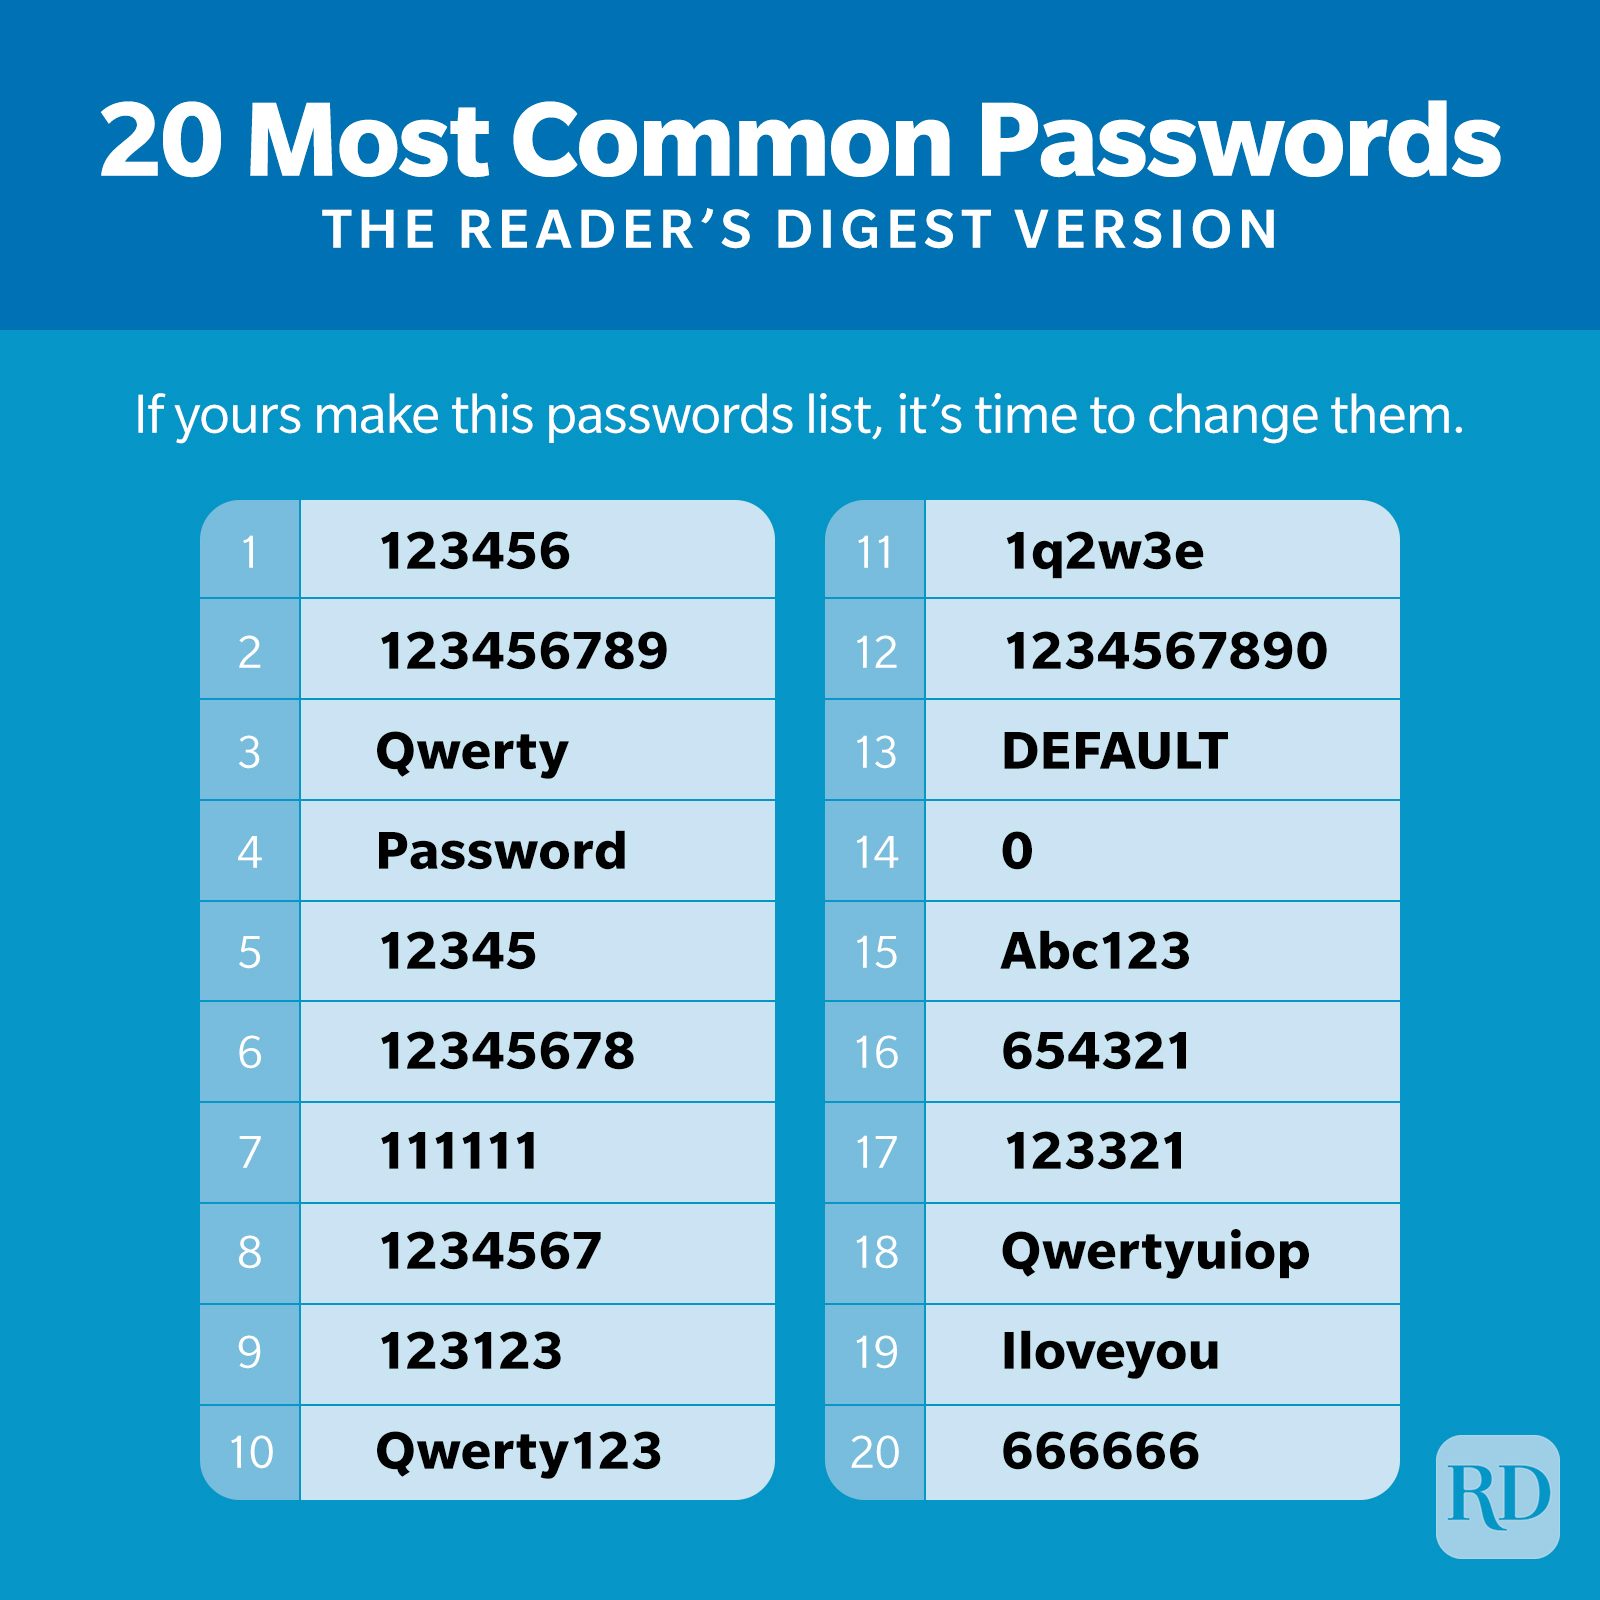 Why So Many People Make Their Password 'Dragon